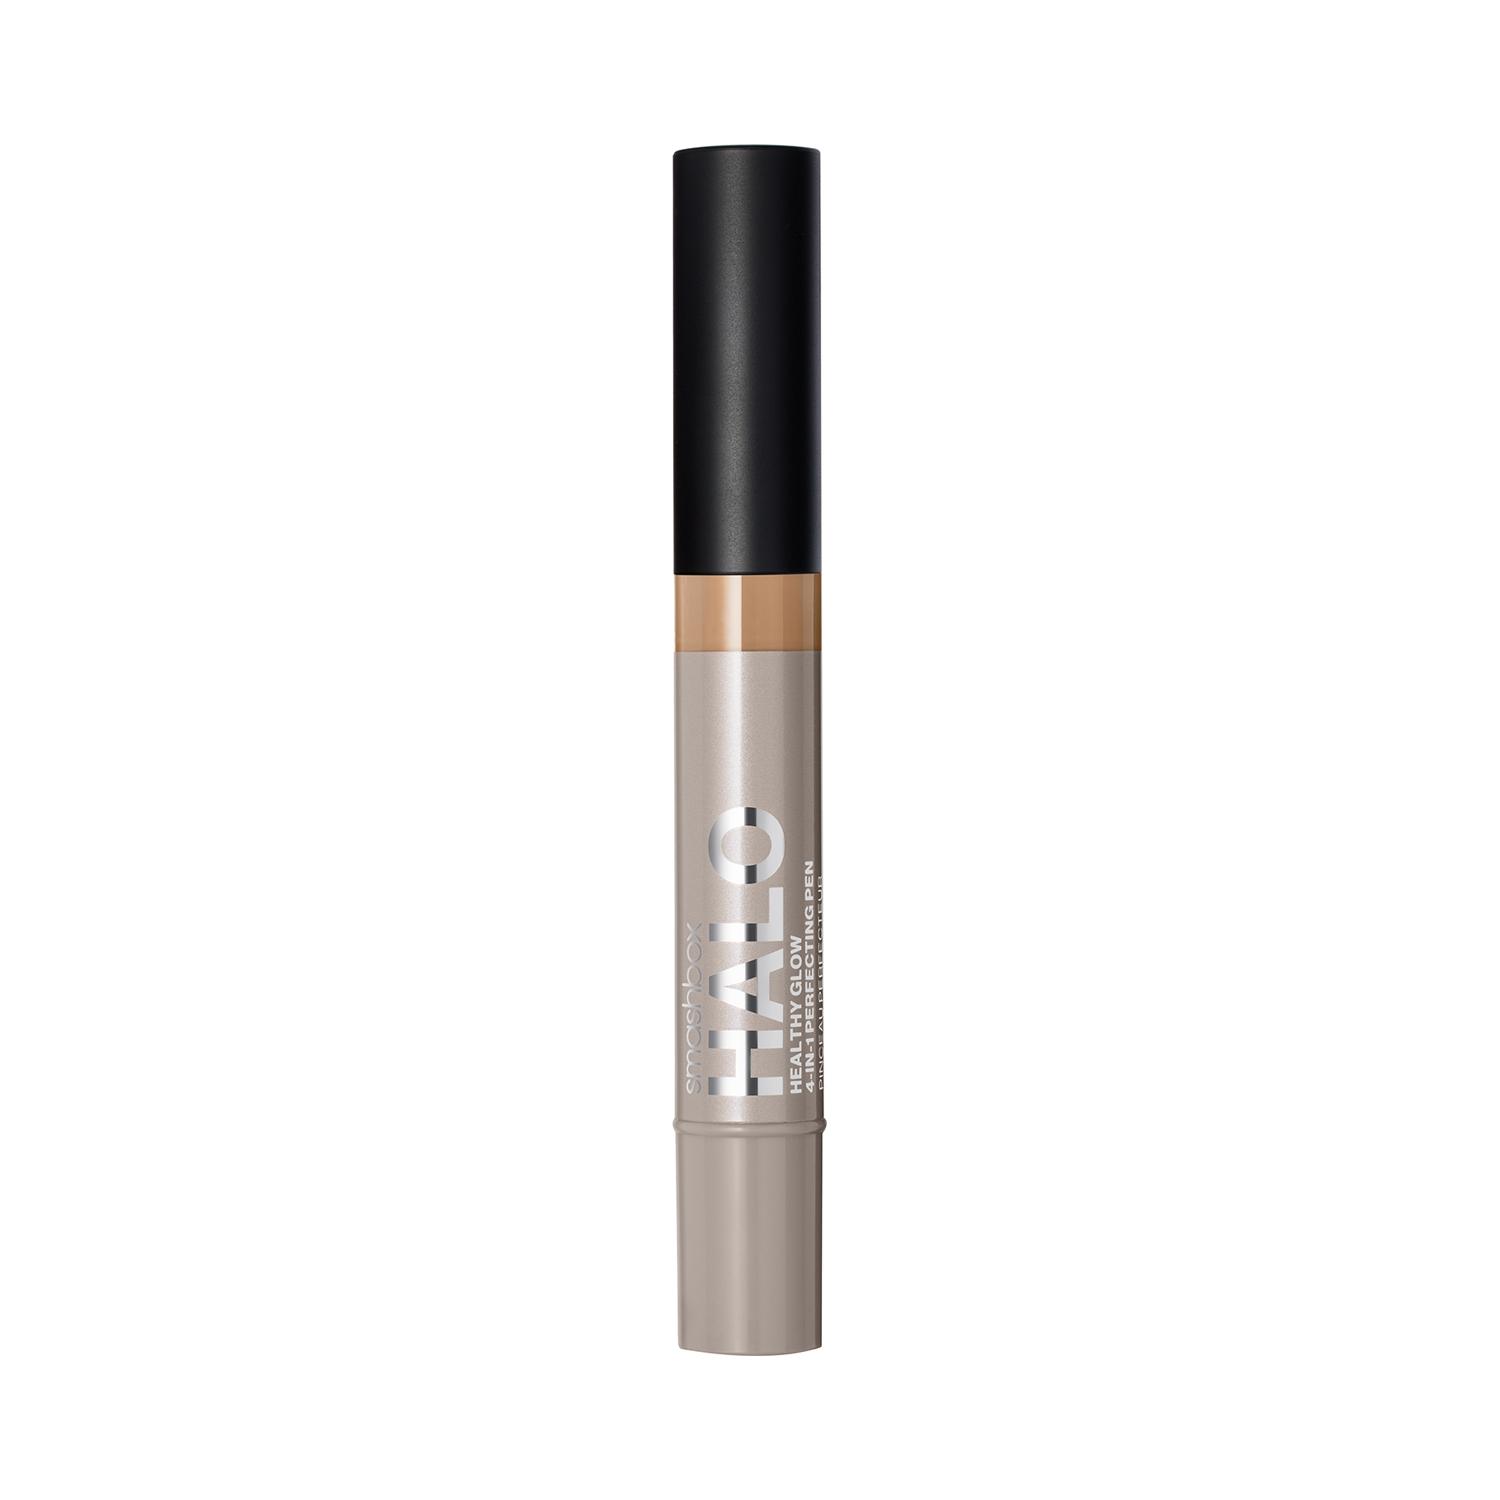 smashbox halo healthy glow 4-in-1 perfecting concealer pen - l30n (3.5ml)